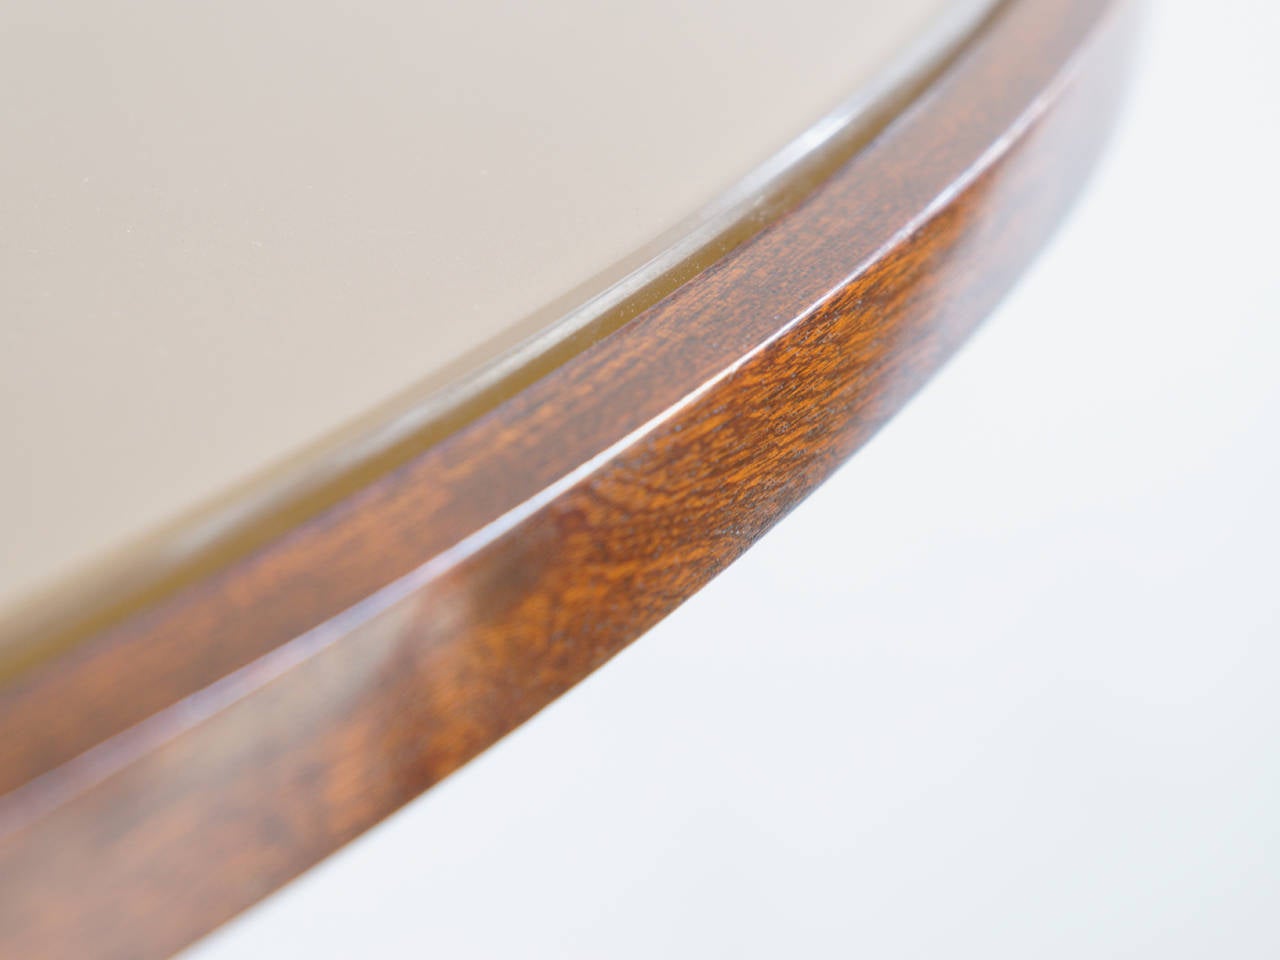 Oval rosewood dining or centre table designed by Guglielmo Ulrich. Glass top in the most beautiful shade of warm champagne, inset from rosewood edge. Pierced Rosewood, brass and marble pedestal base, circa 1940.